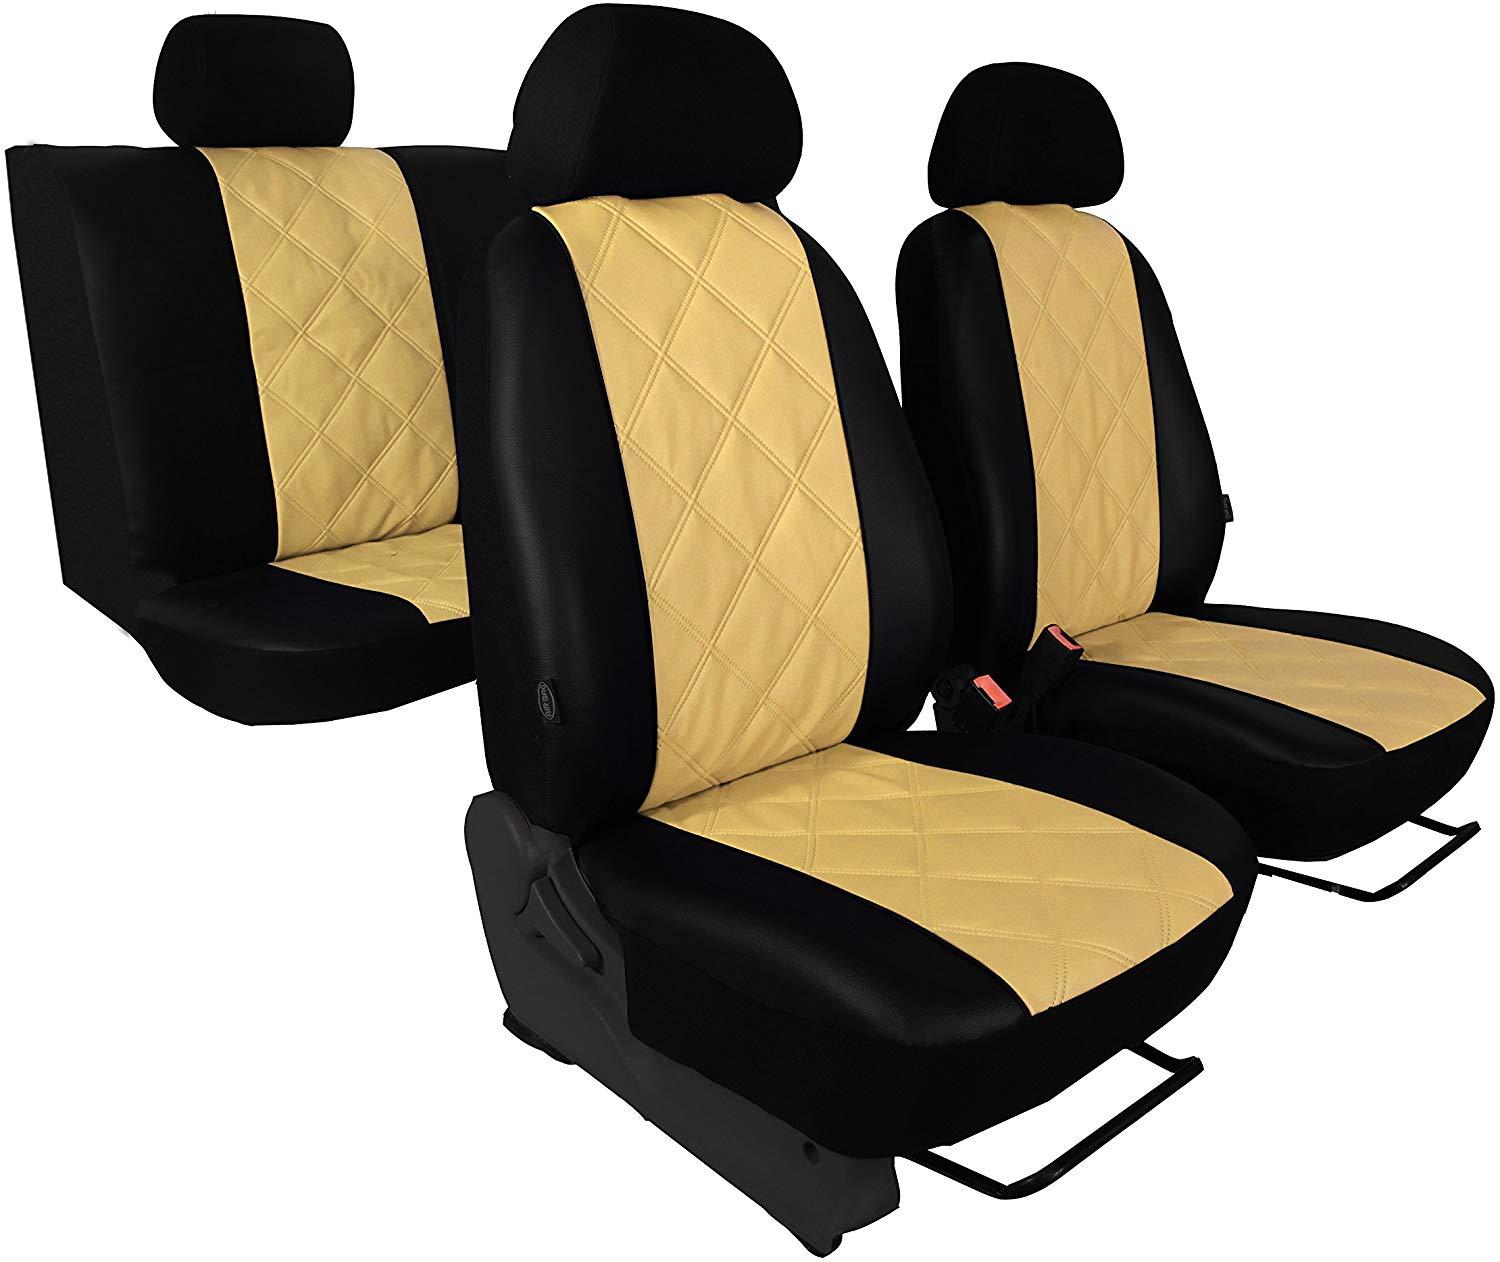 SKODA FABIA 1 Eco Leather Seat Cover with Diagonal Quilted Seat in 5 Colours